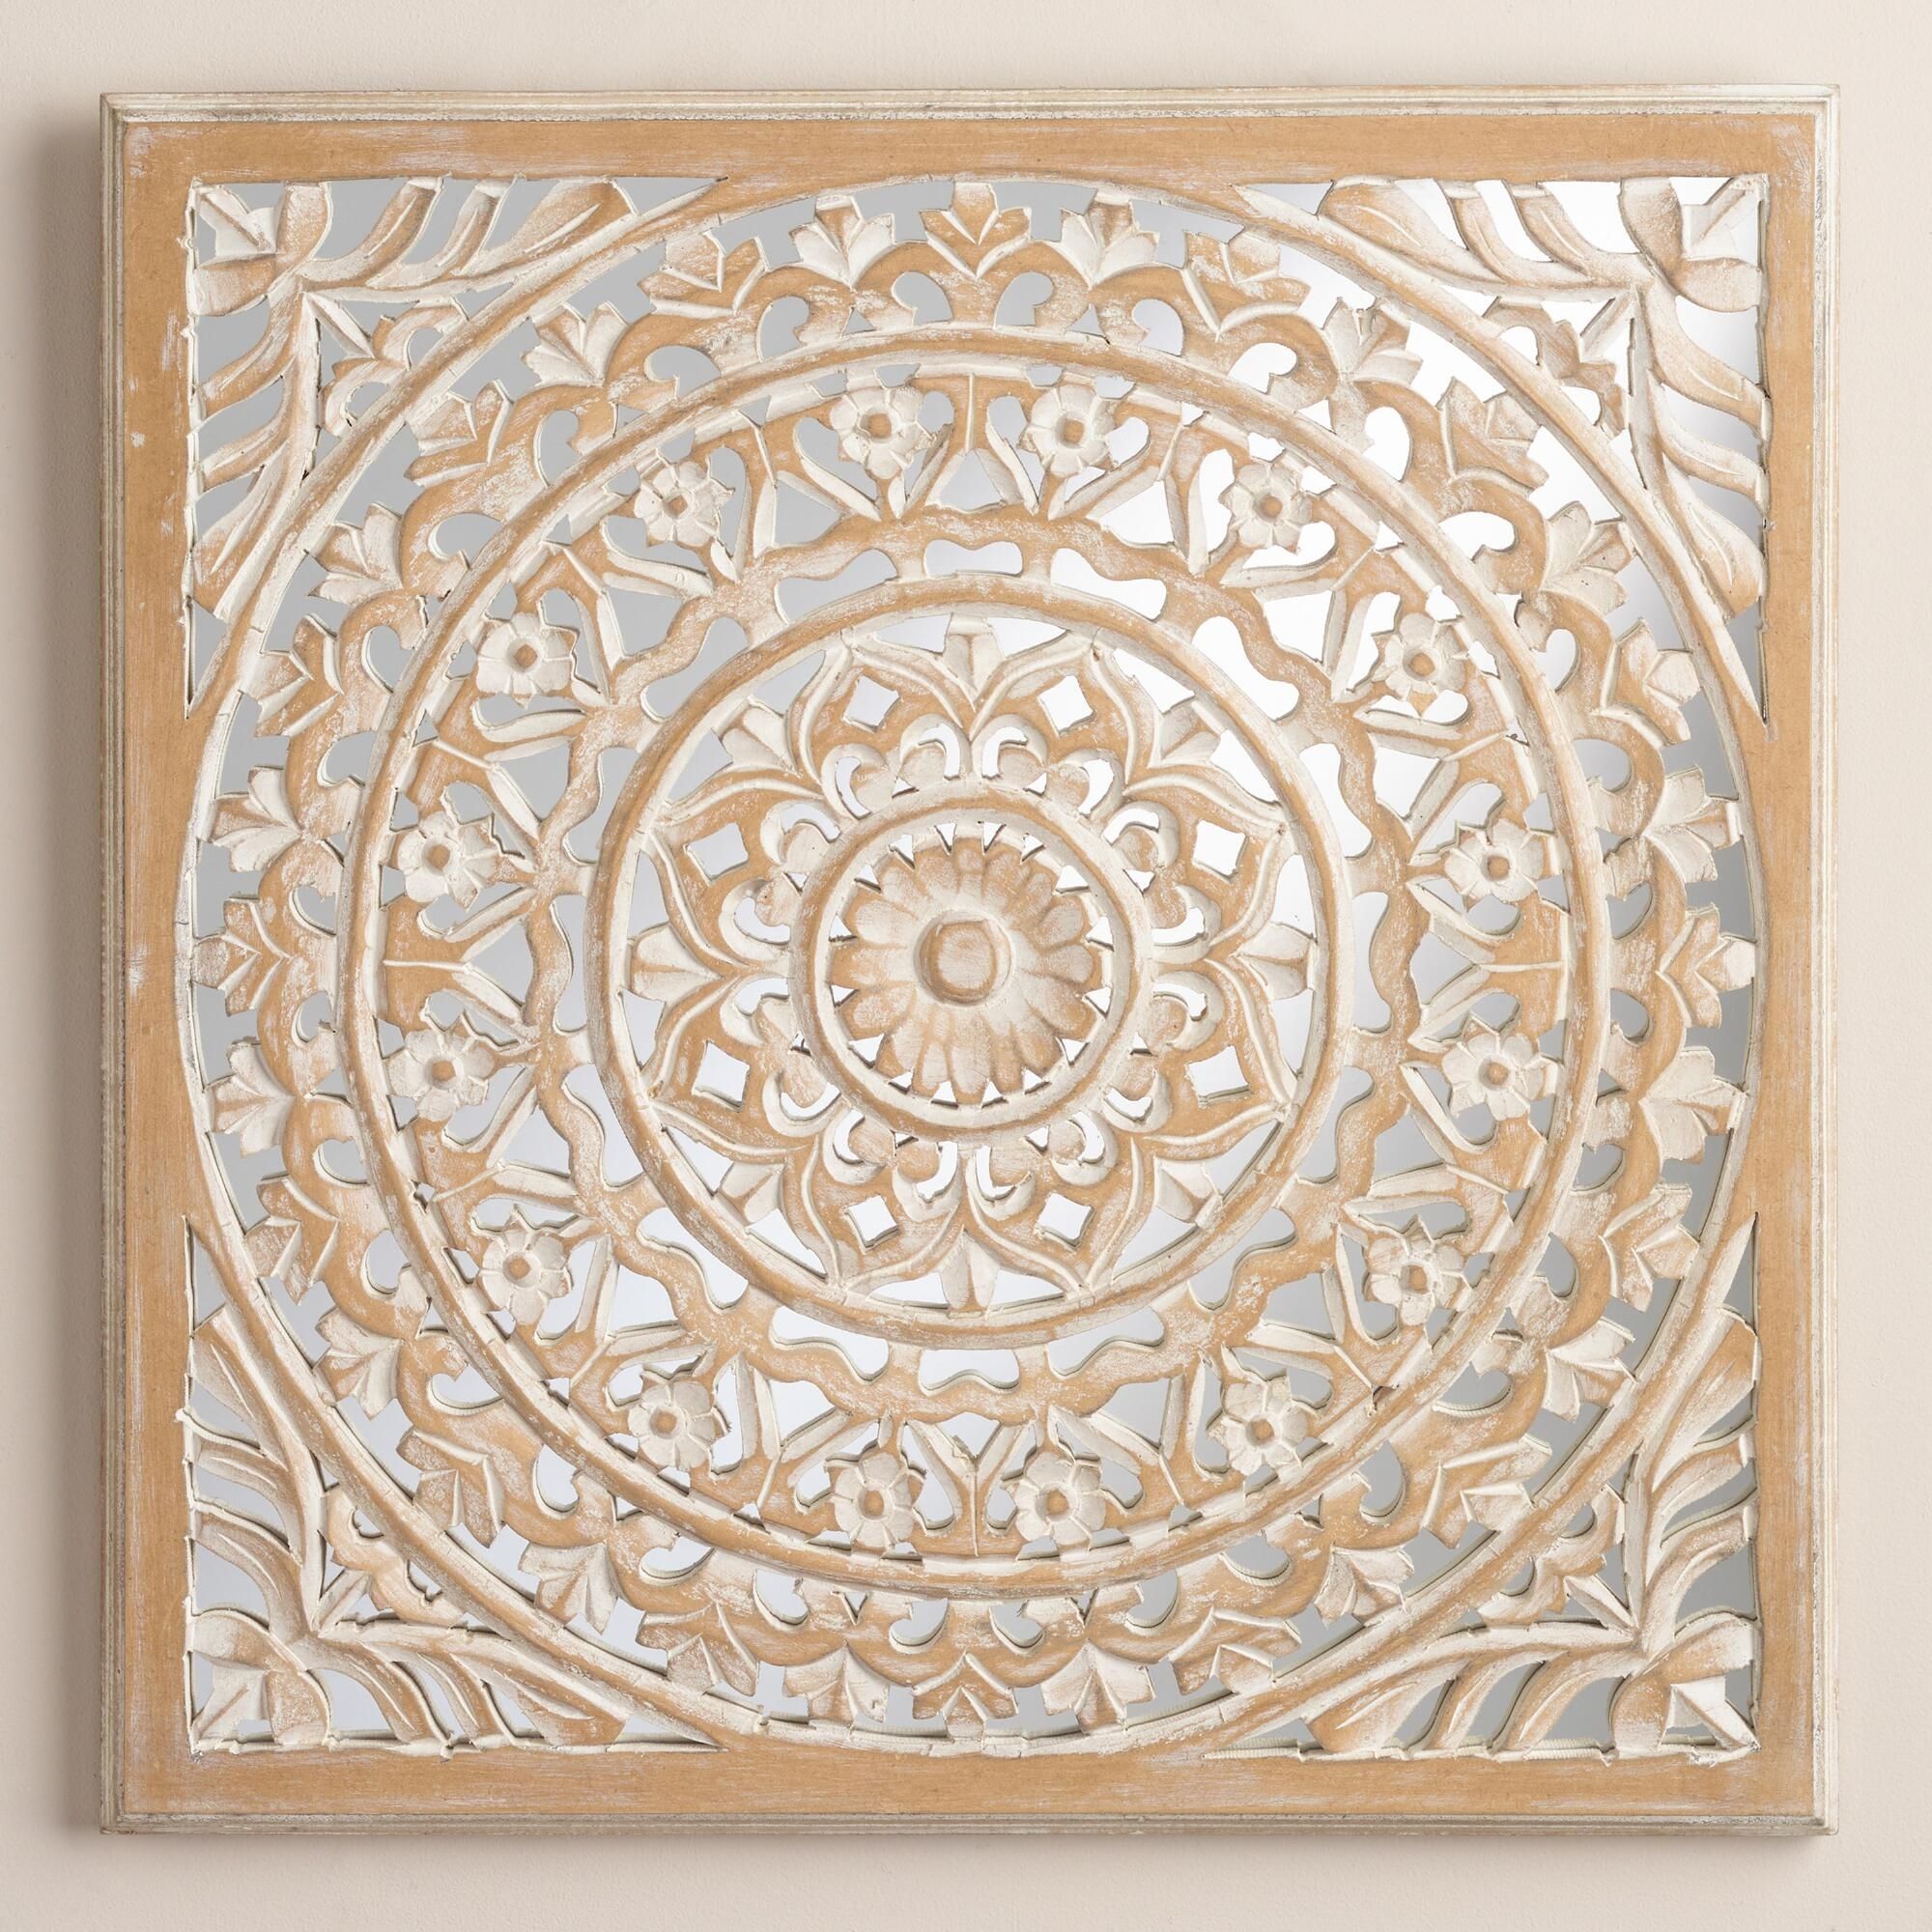 Wood Medallion Wall Art Stickers Scrolled Metal Wall Medallion Decor Throughout Wood Medallion Wall Art (View 5 of 20)